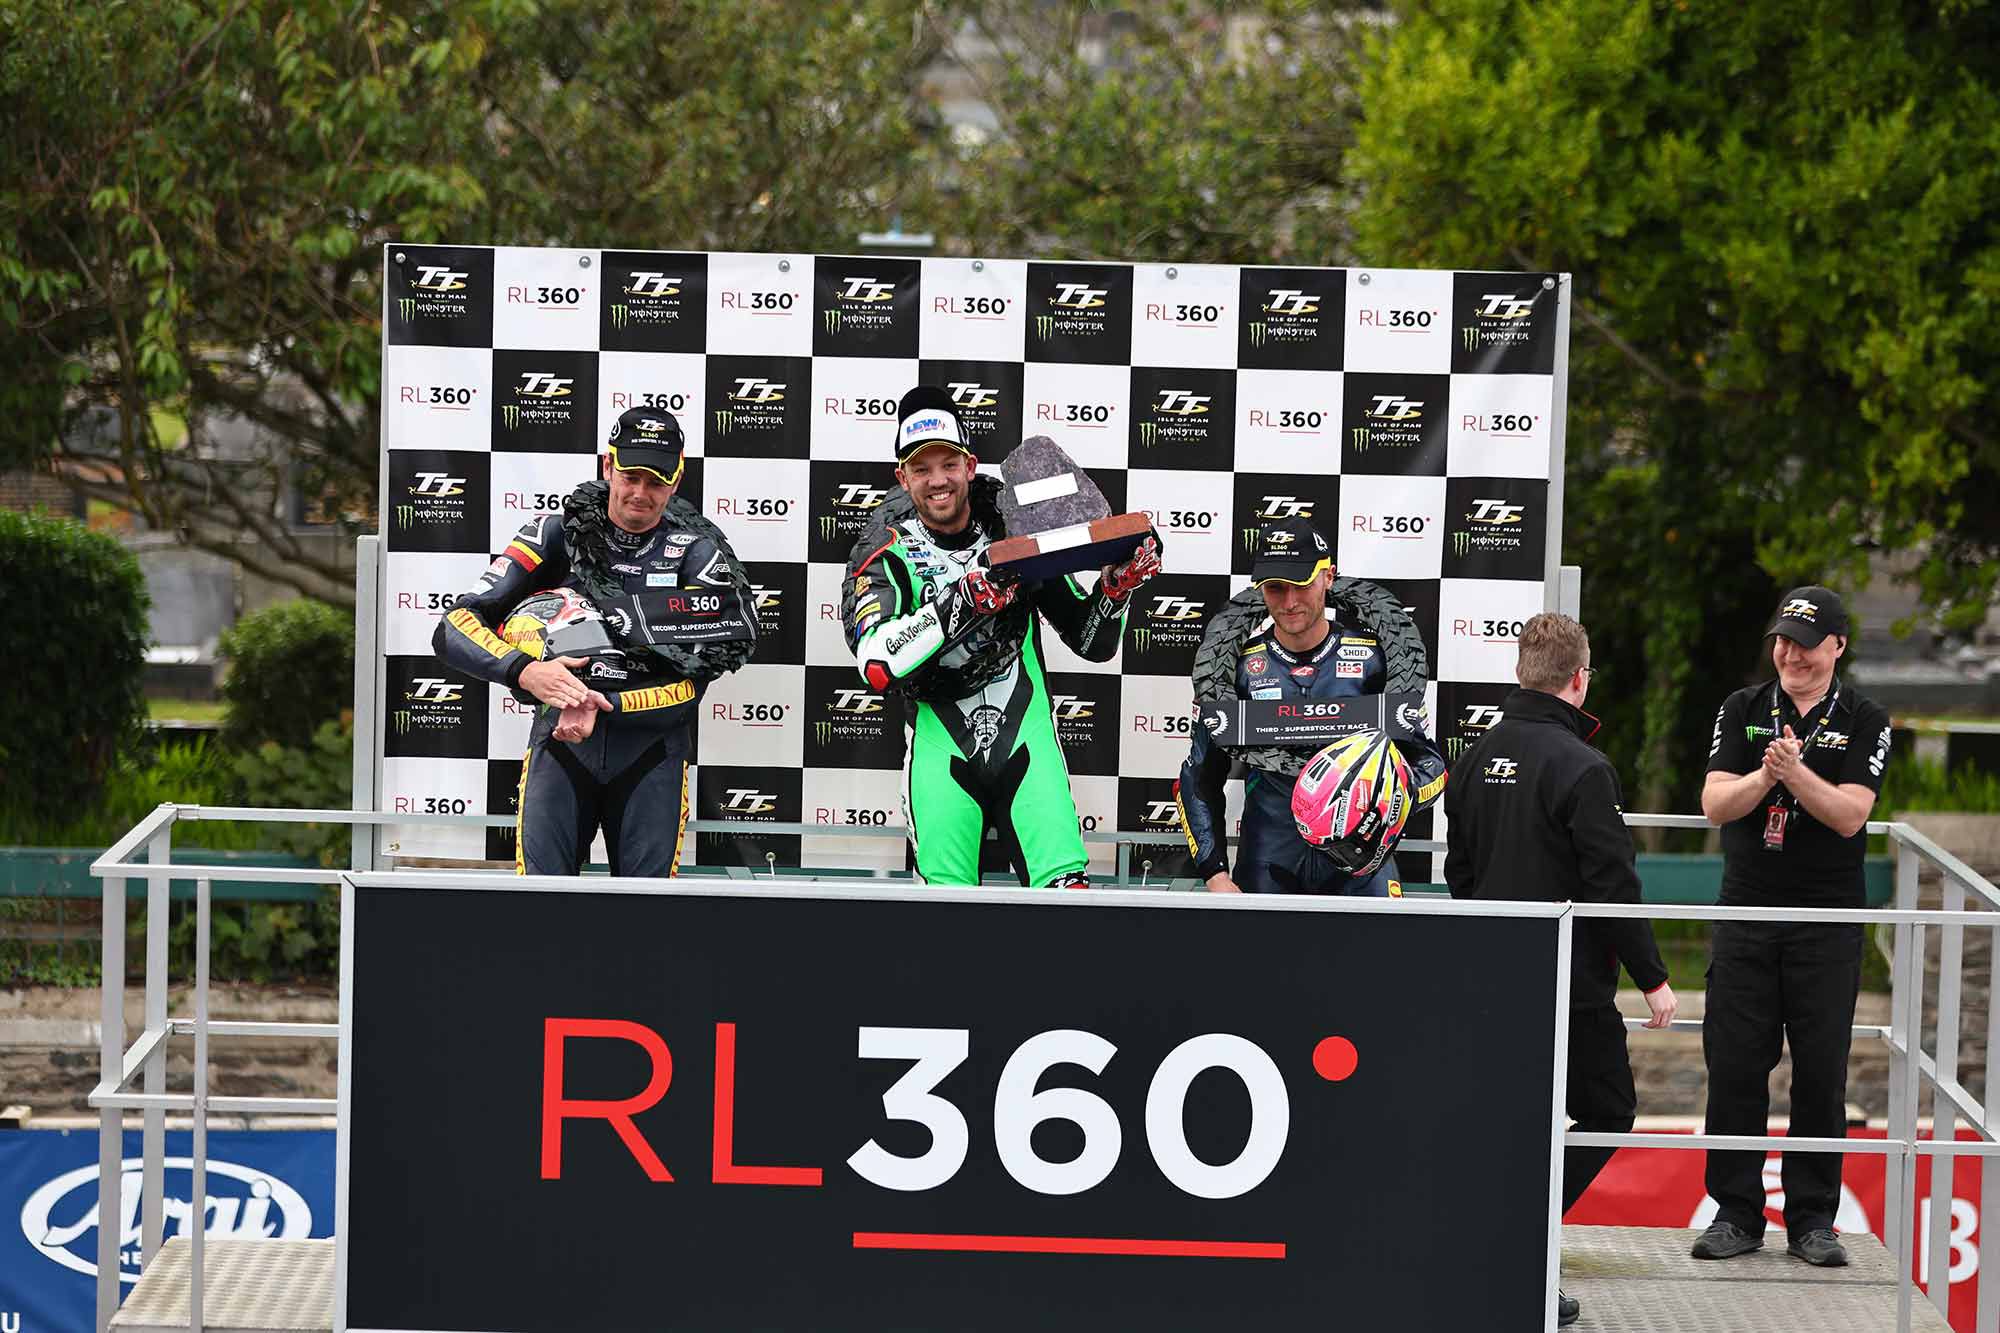 The final hardware won: Peter Hickman hoists the Senior TT trophy, alongside Padgett teammates, Conor Cummins and Davy Todd, 2nd and 3rd place, respectively.